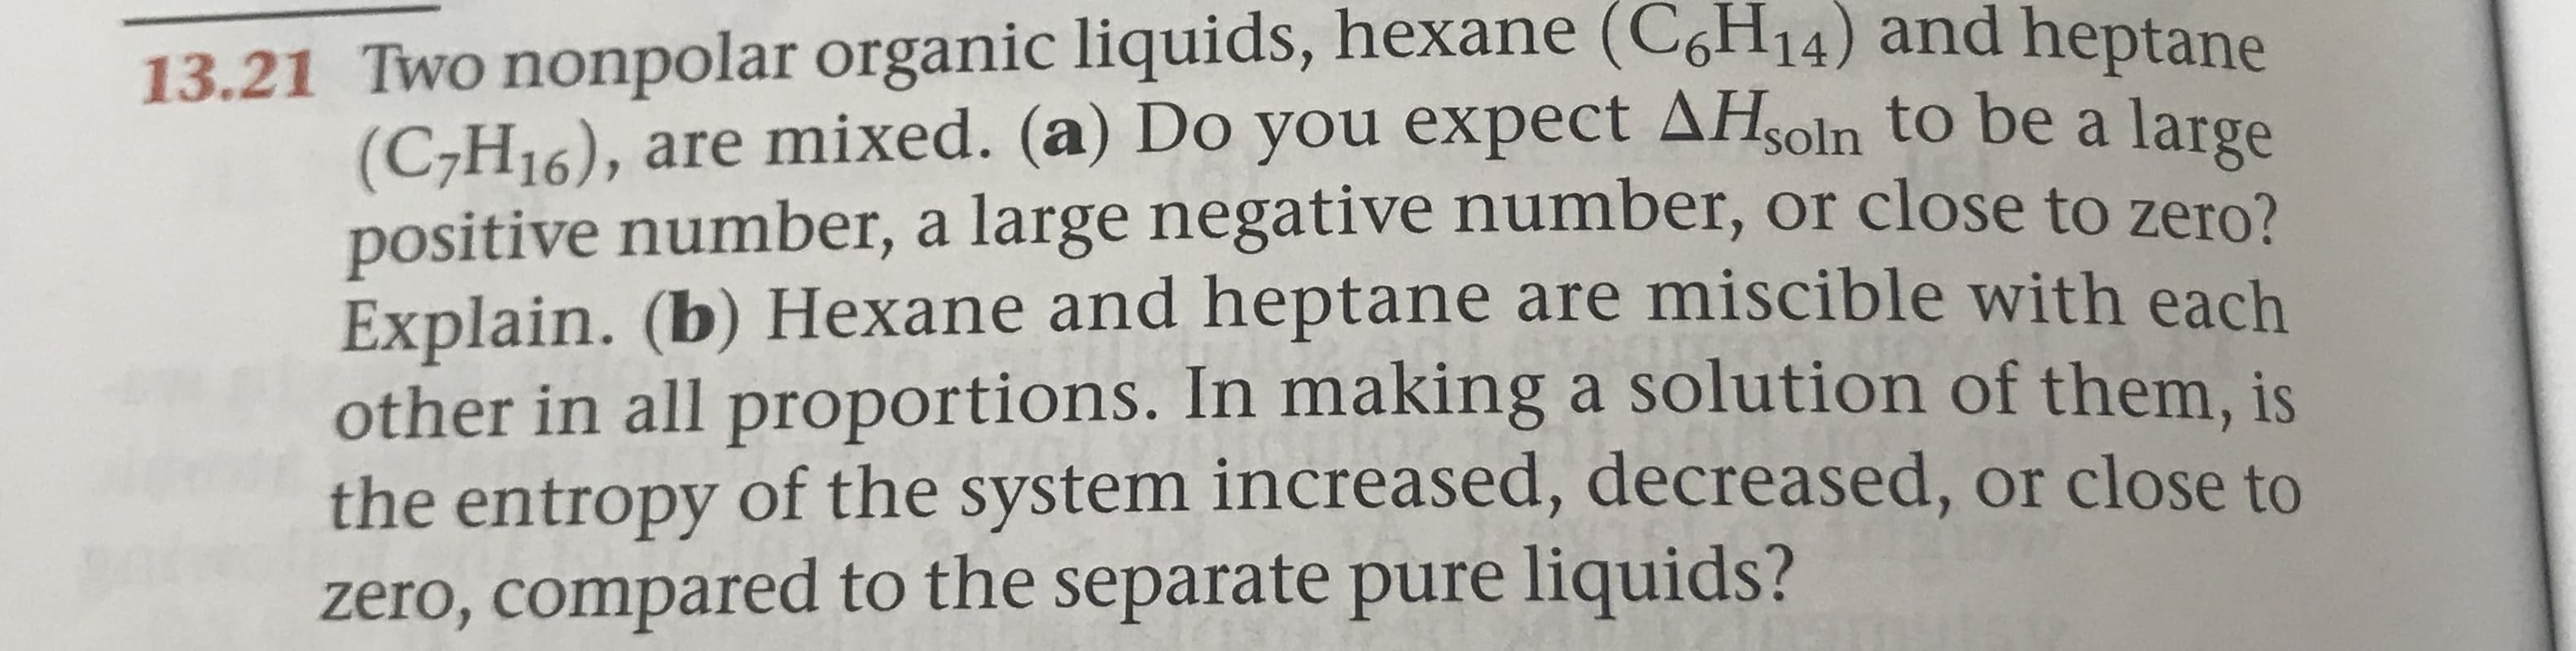 13.21 Two nonpolar organic liquids, hexane (C6H14) and heptane
(C7H16), are mixed. (a) Do you expect AHsoln to be a large
positive number, a large negative number, or close to zero?
Explain. (b) Hexane and heptane are miscible with each
other in all proportions. In making a solution of them, is
the entropy of the system increased, decreased, or close to
zero, compared to the separate pure liquids?
